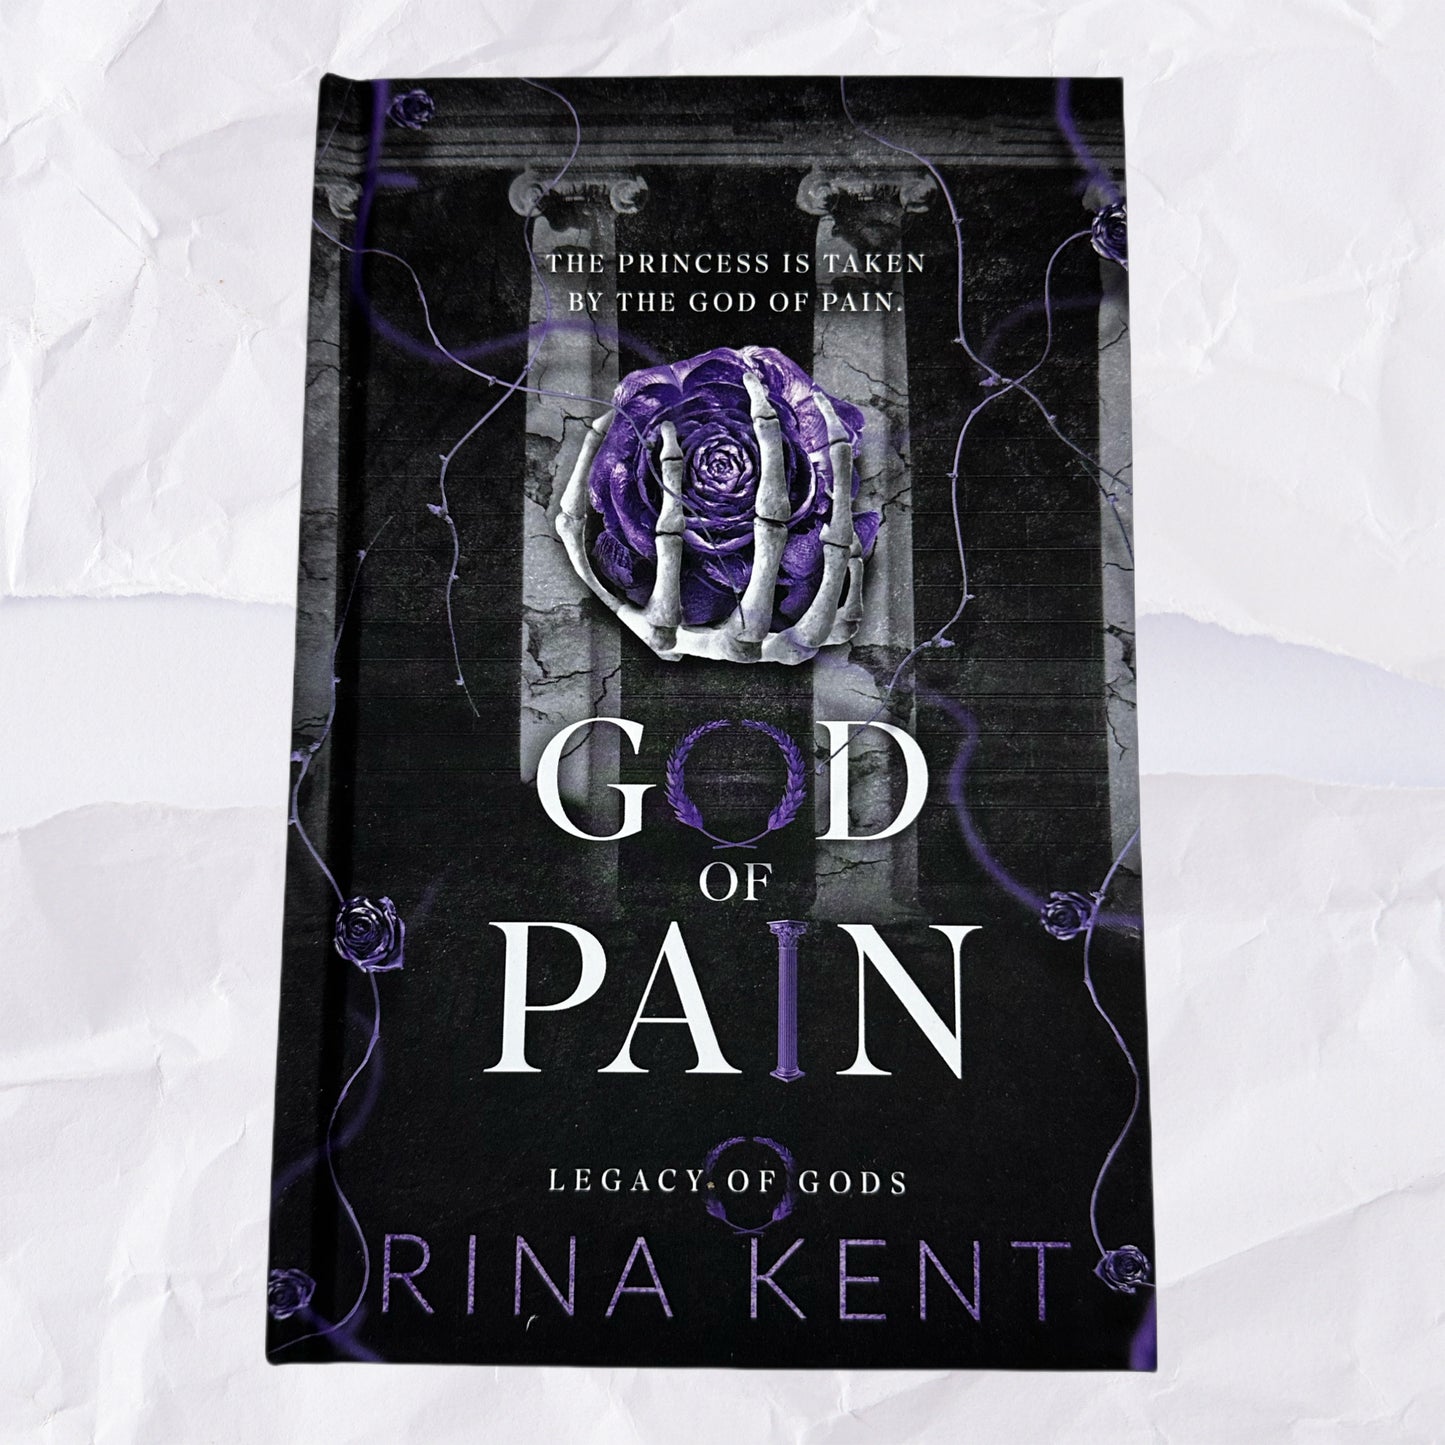 God of Pain (Legacy of Gods #2) by Rina Kent - Special Edition Print - Hardcover